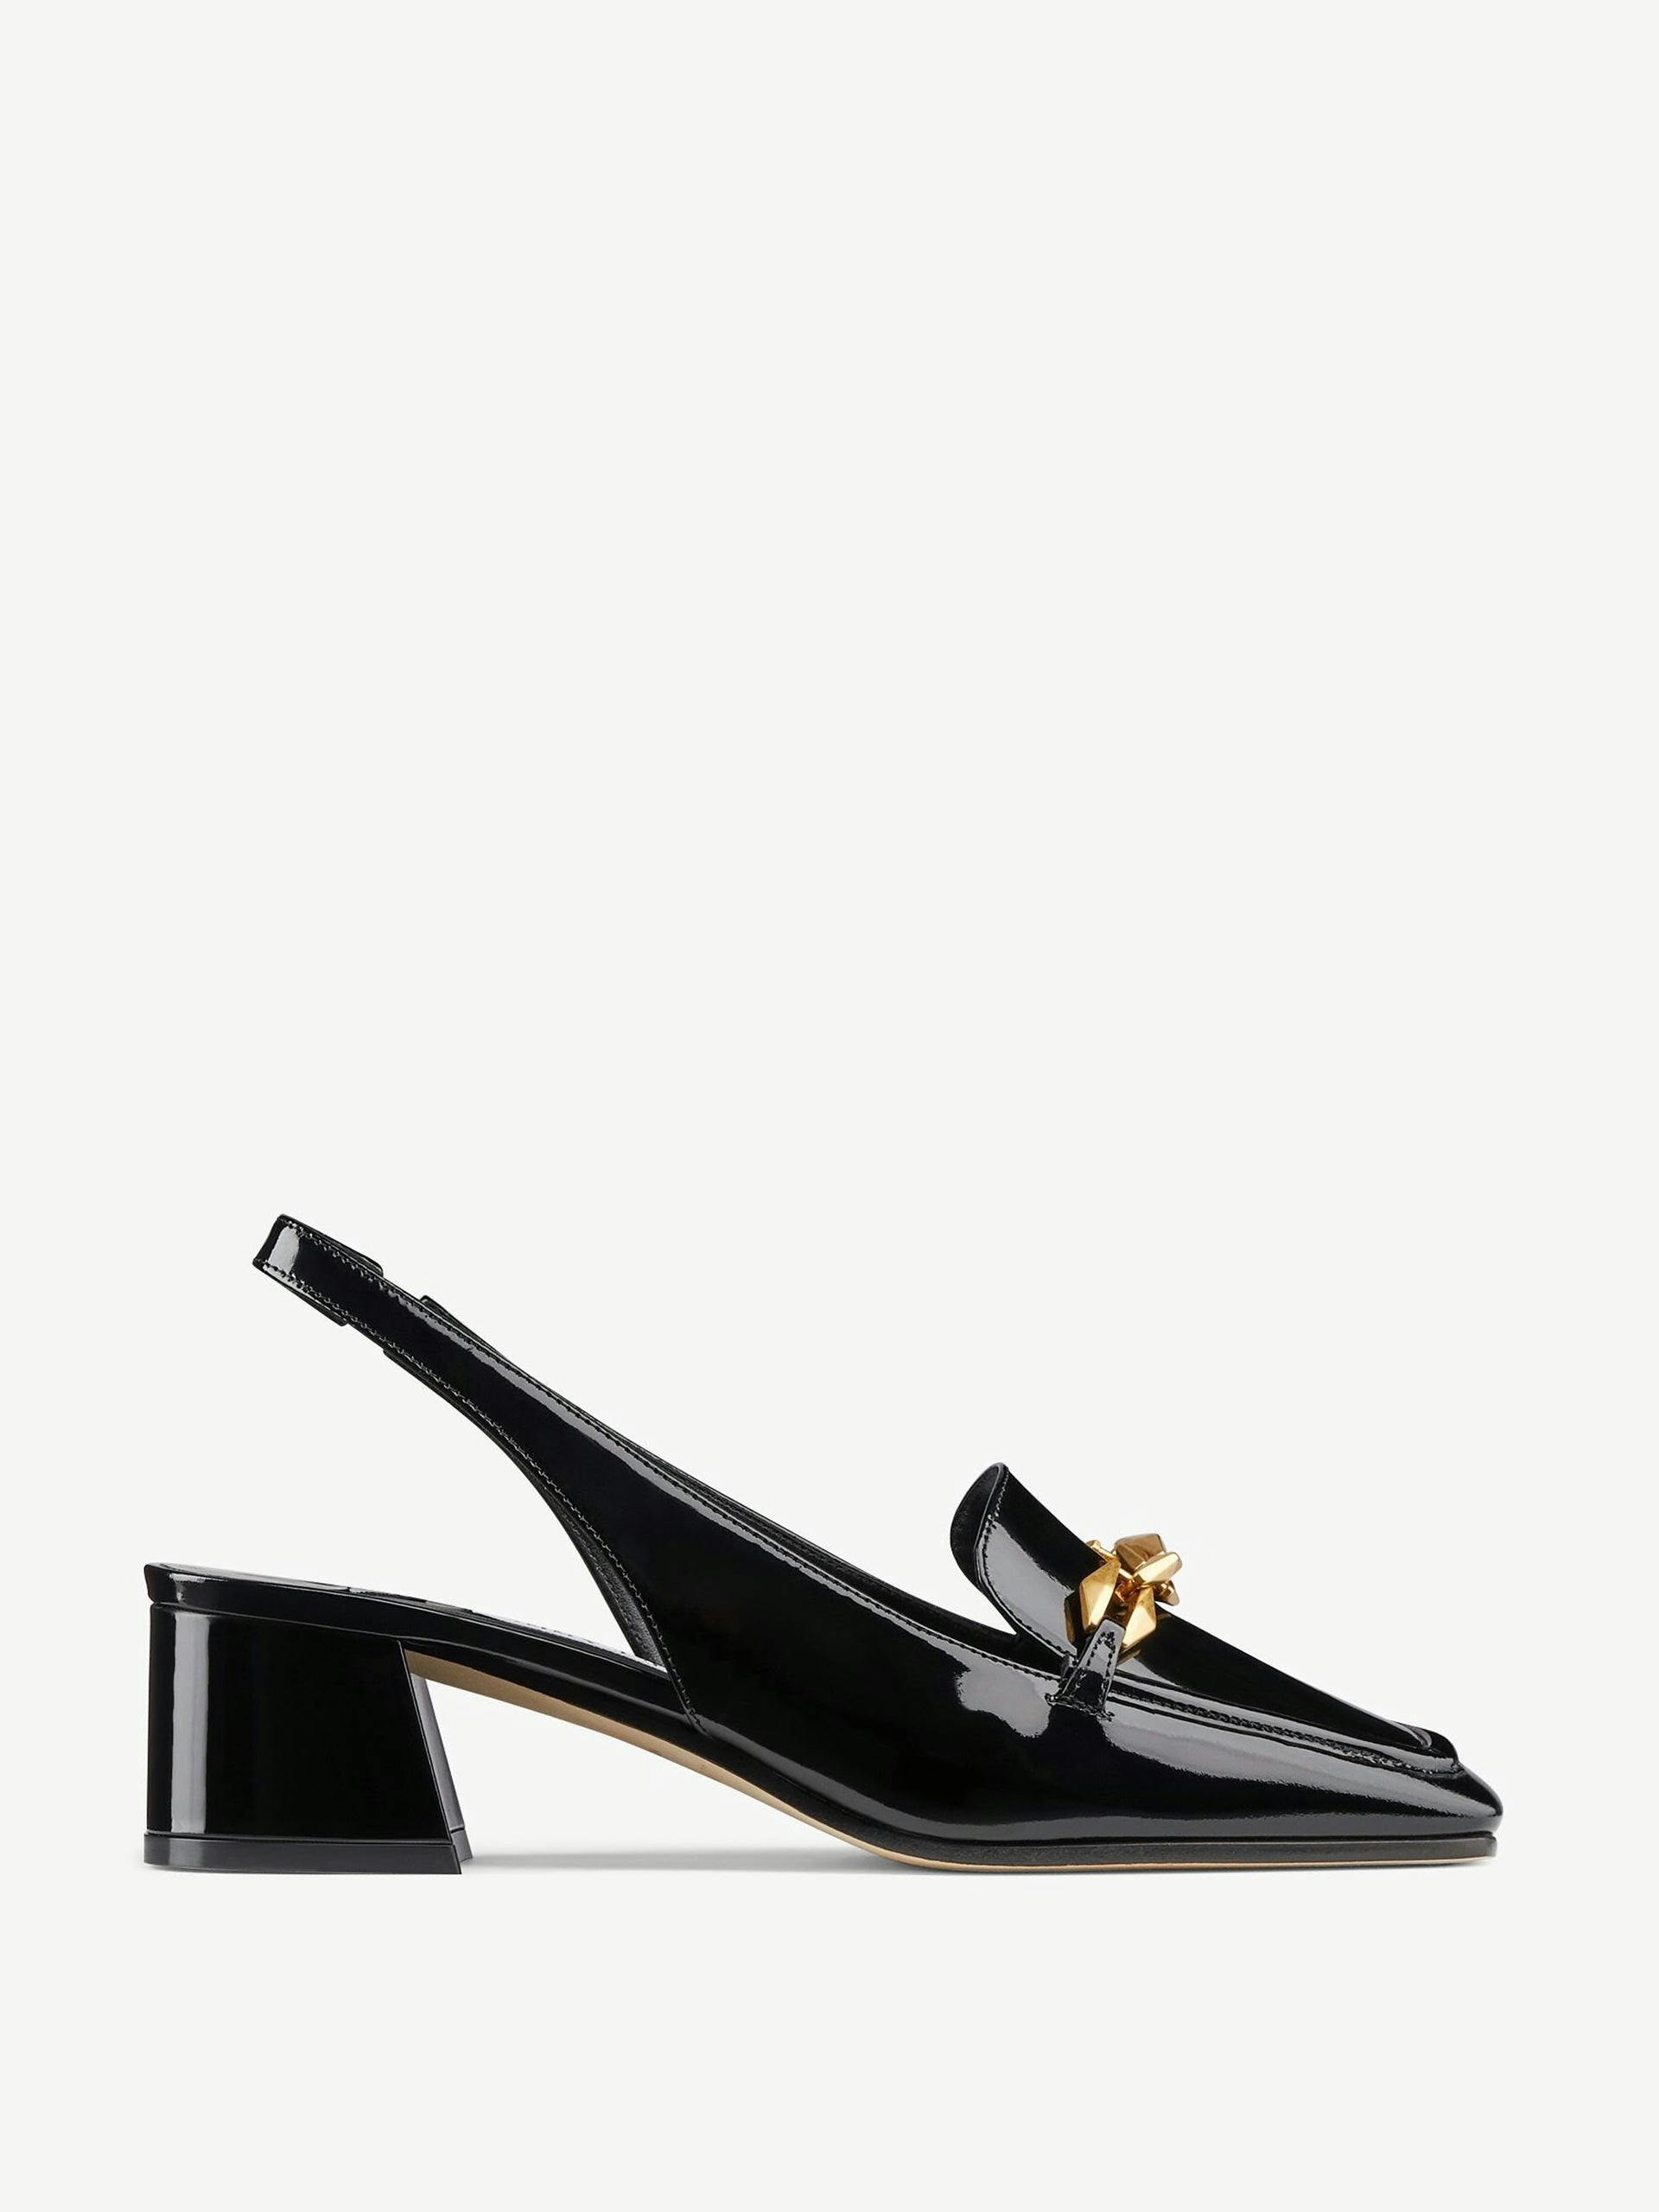 Tilda patent leather slingback pumps with chain embellishment